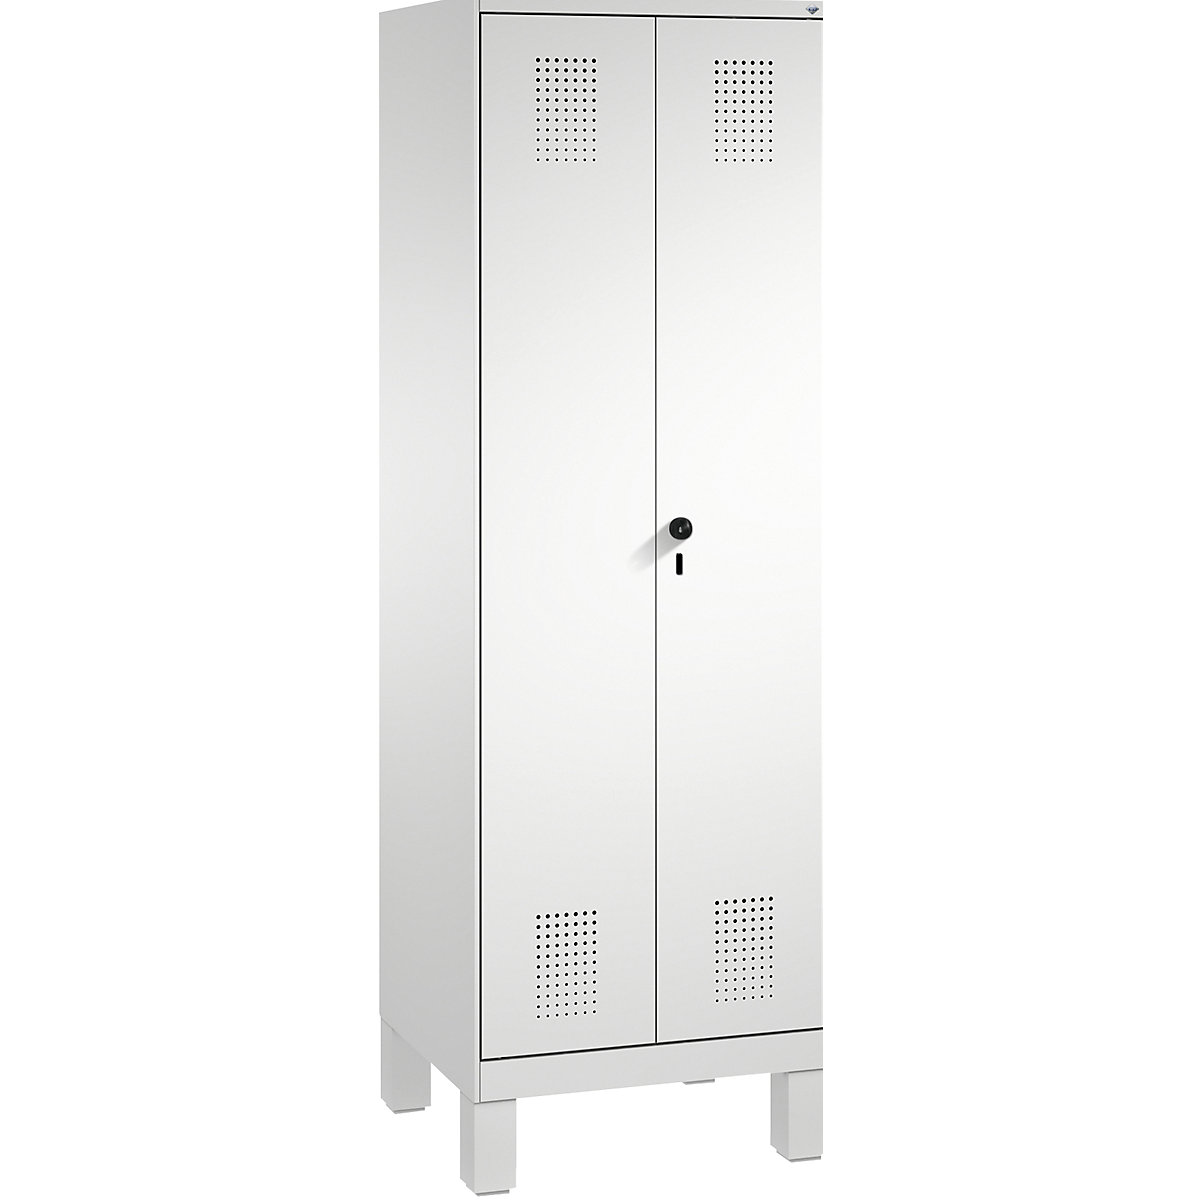 EVOLO storage cupboard, doors close in the middle, with feet – C+P